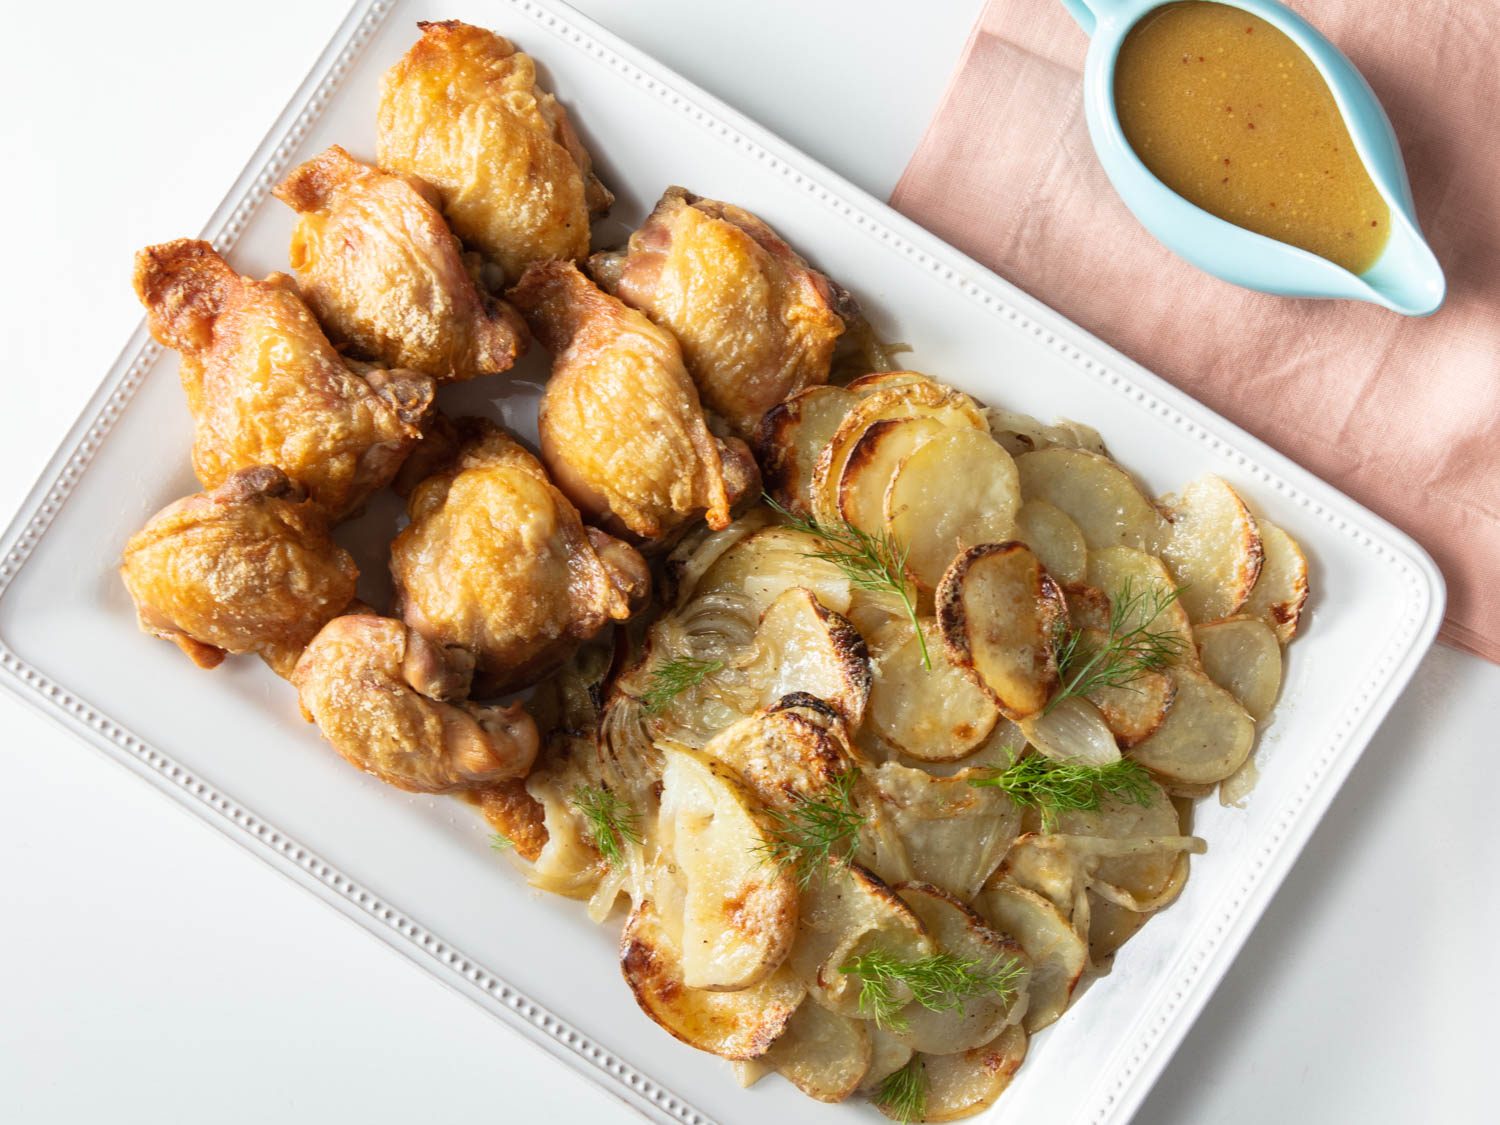 Sheet-Pan Chicken Thighs With Potatoes, Fennel, and Mustard-Beer Sauce